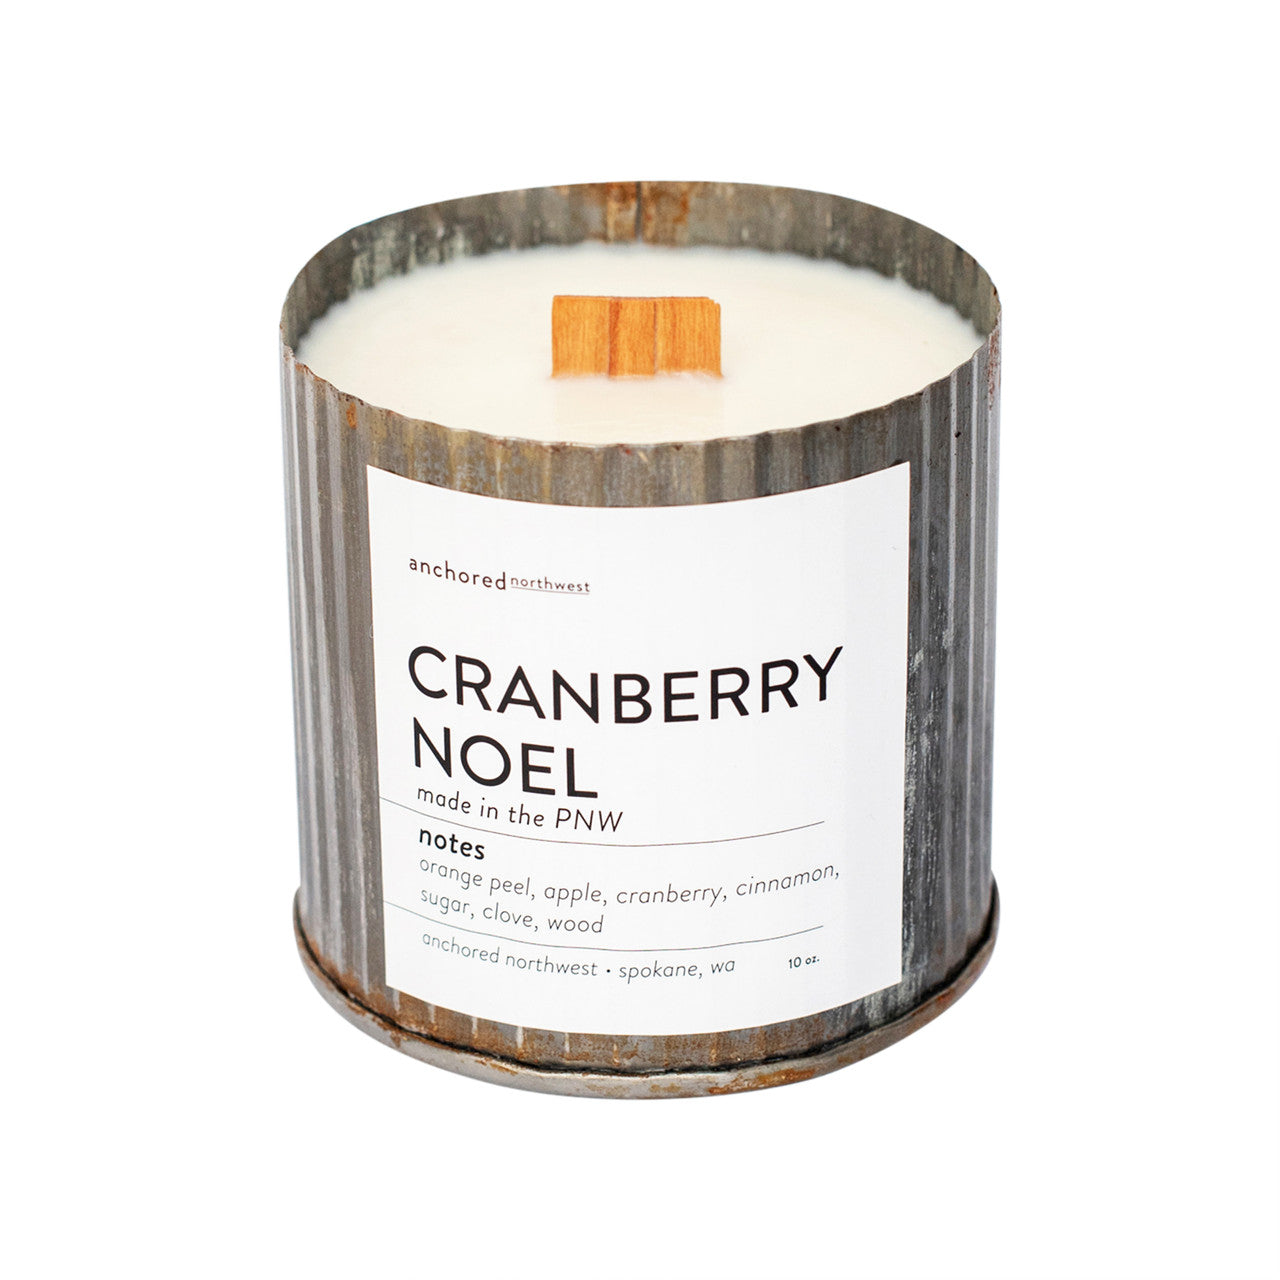 Cranberry Noel Rustic Vintage Soy Candle With Wood Wick